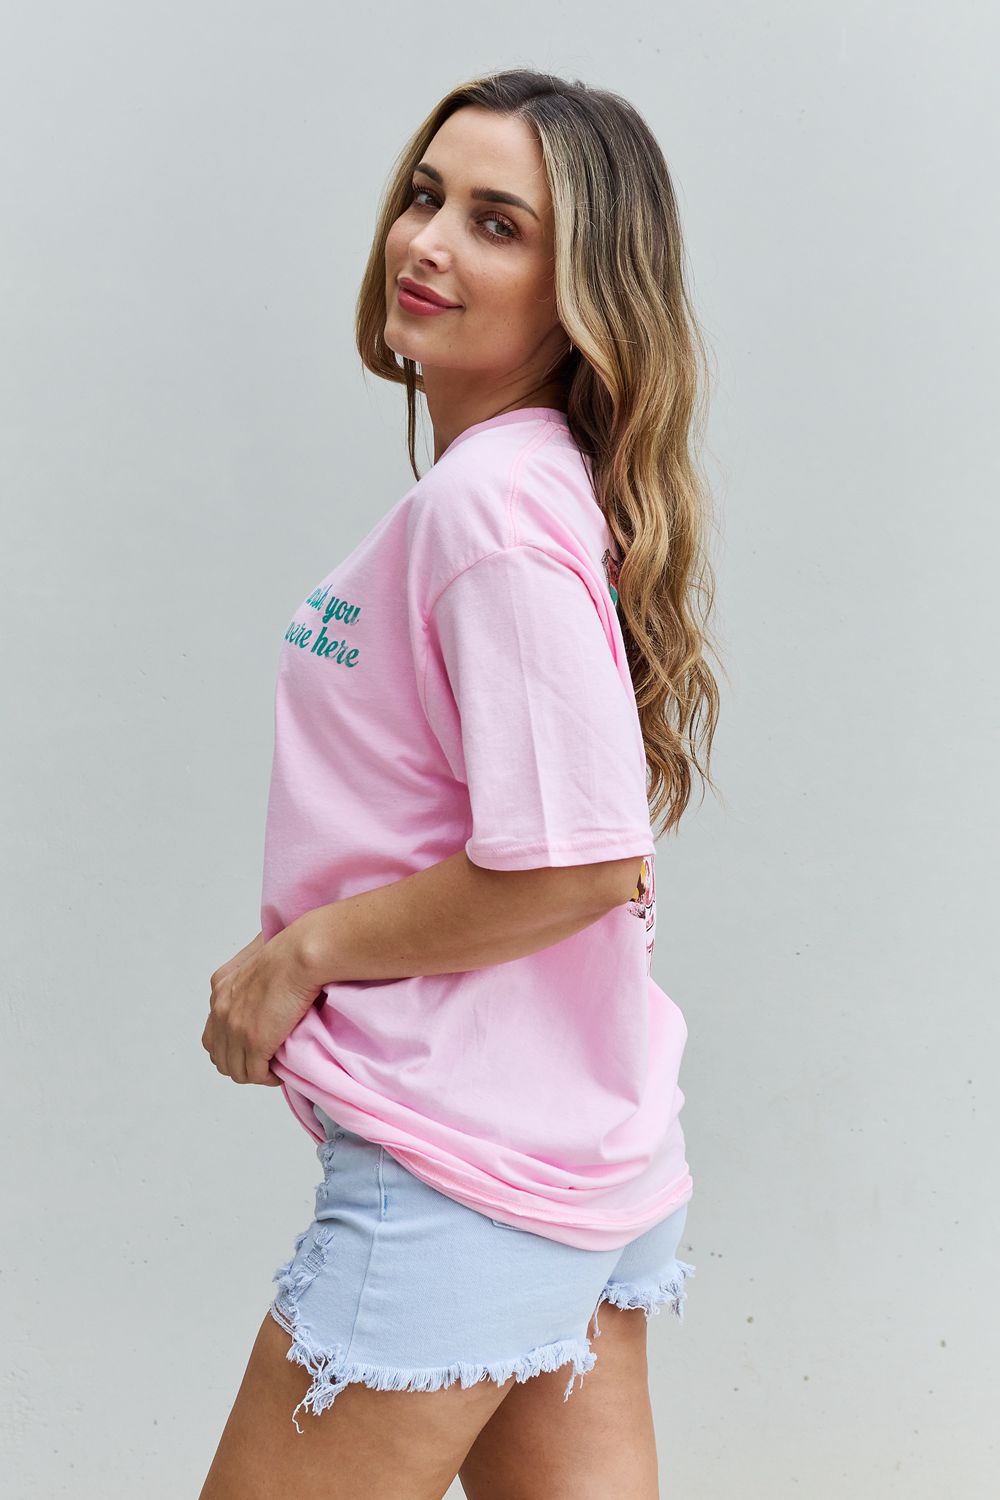 Sweet Claire "Wish You Were Here" Oversized Graphic T-Shirt Trendsi